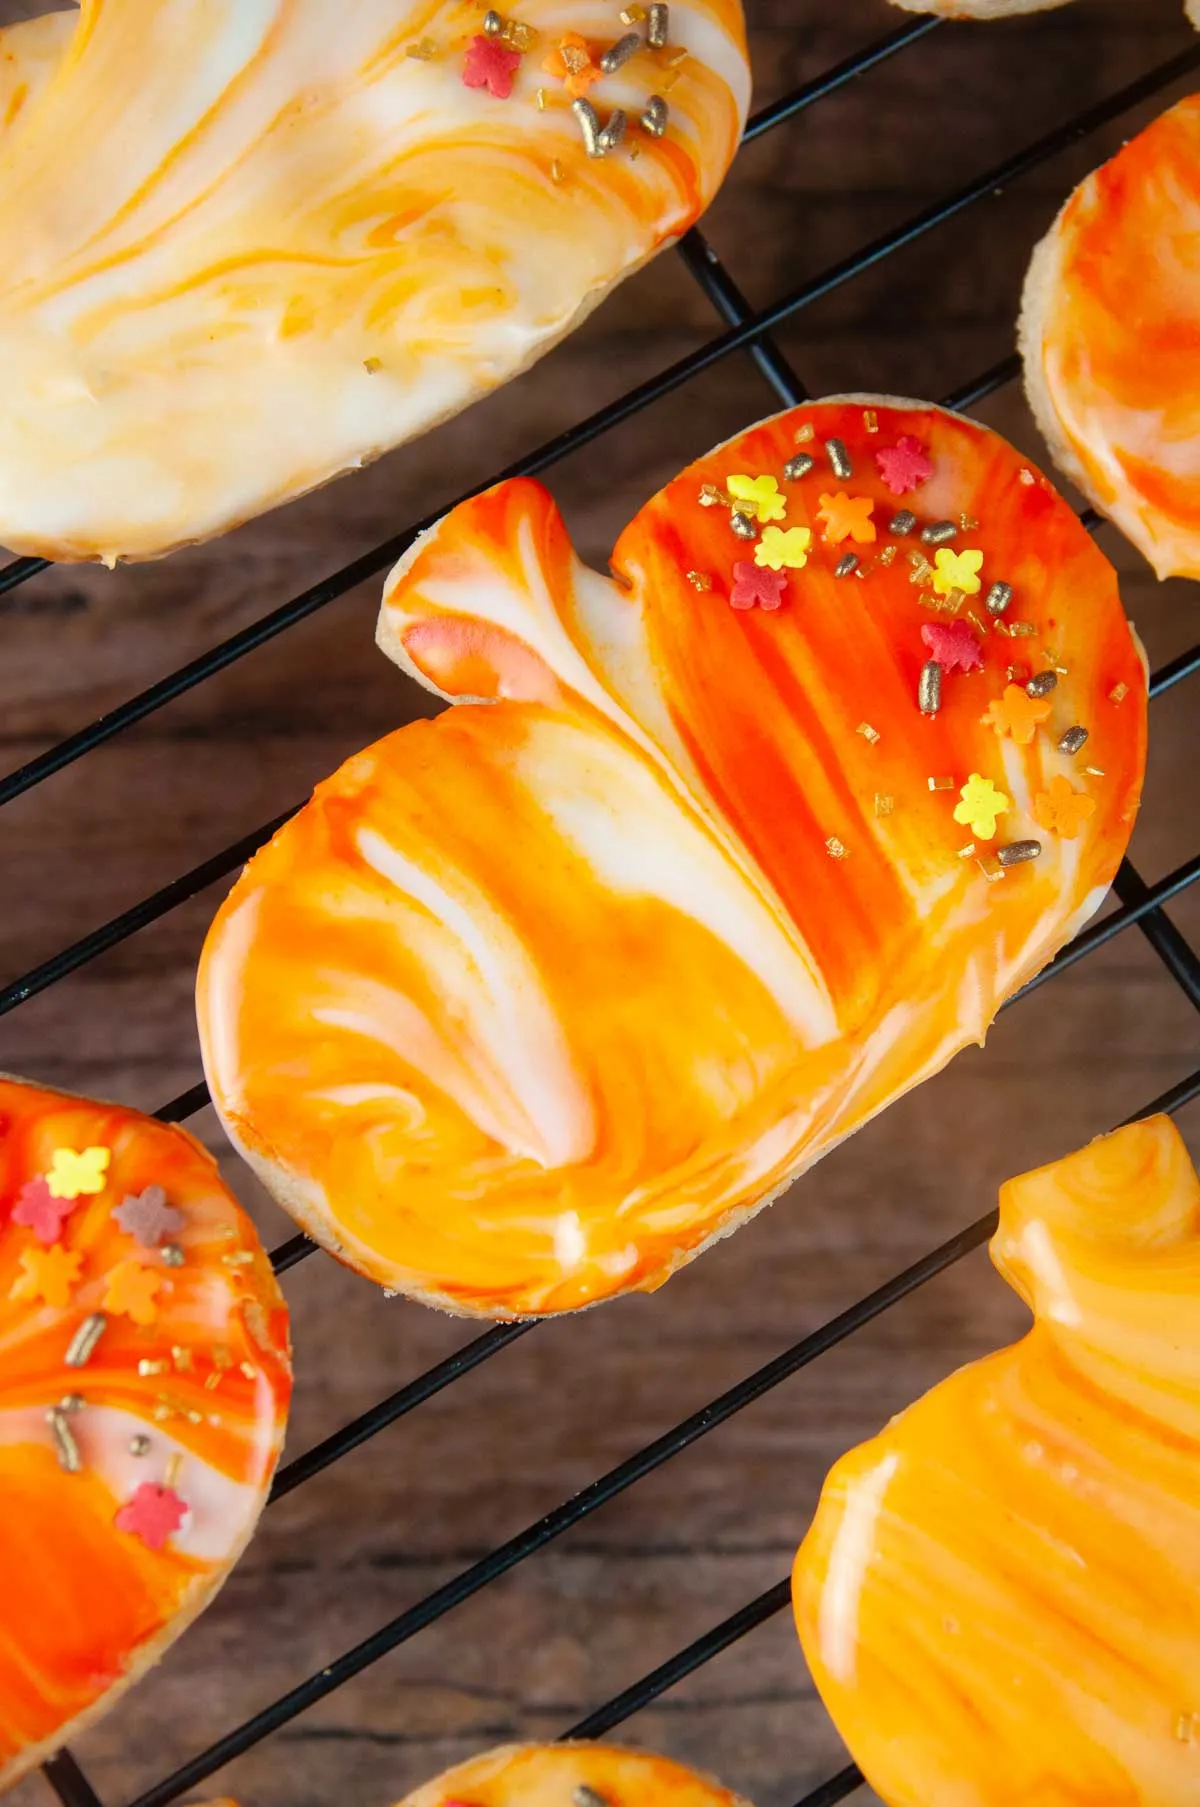 Marbled icing and sprinkles is an easy way to decorate pumpkin spice cut out cookies.